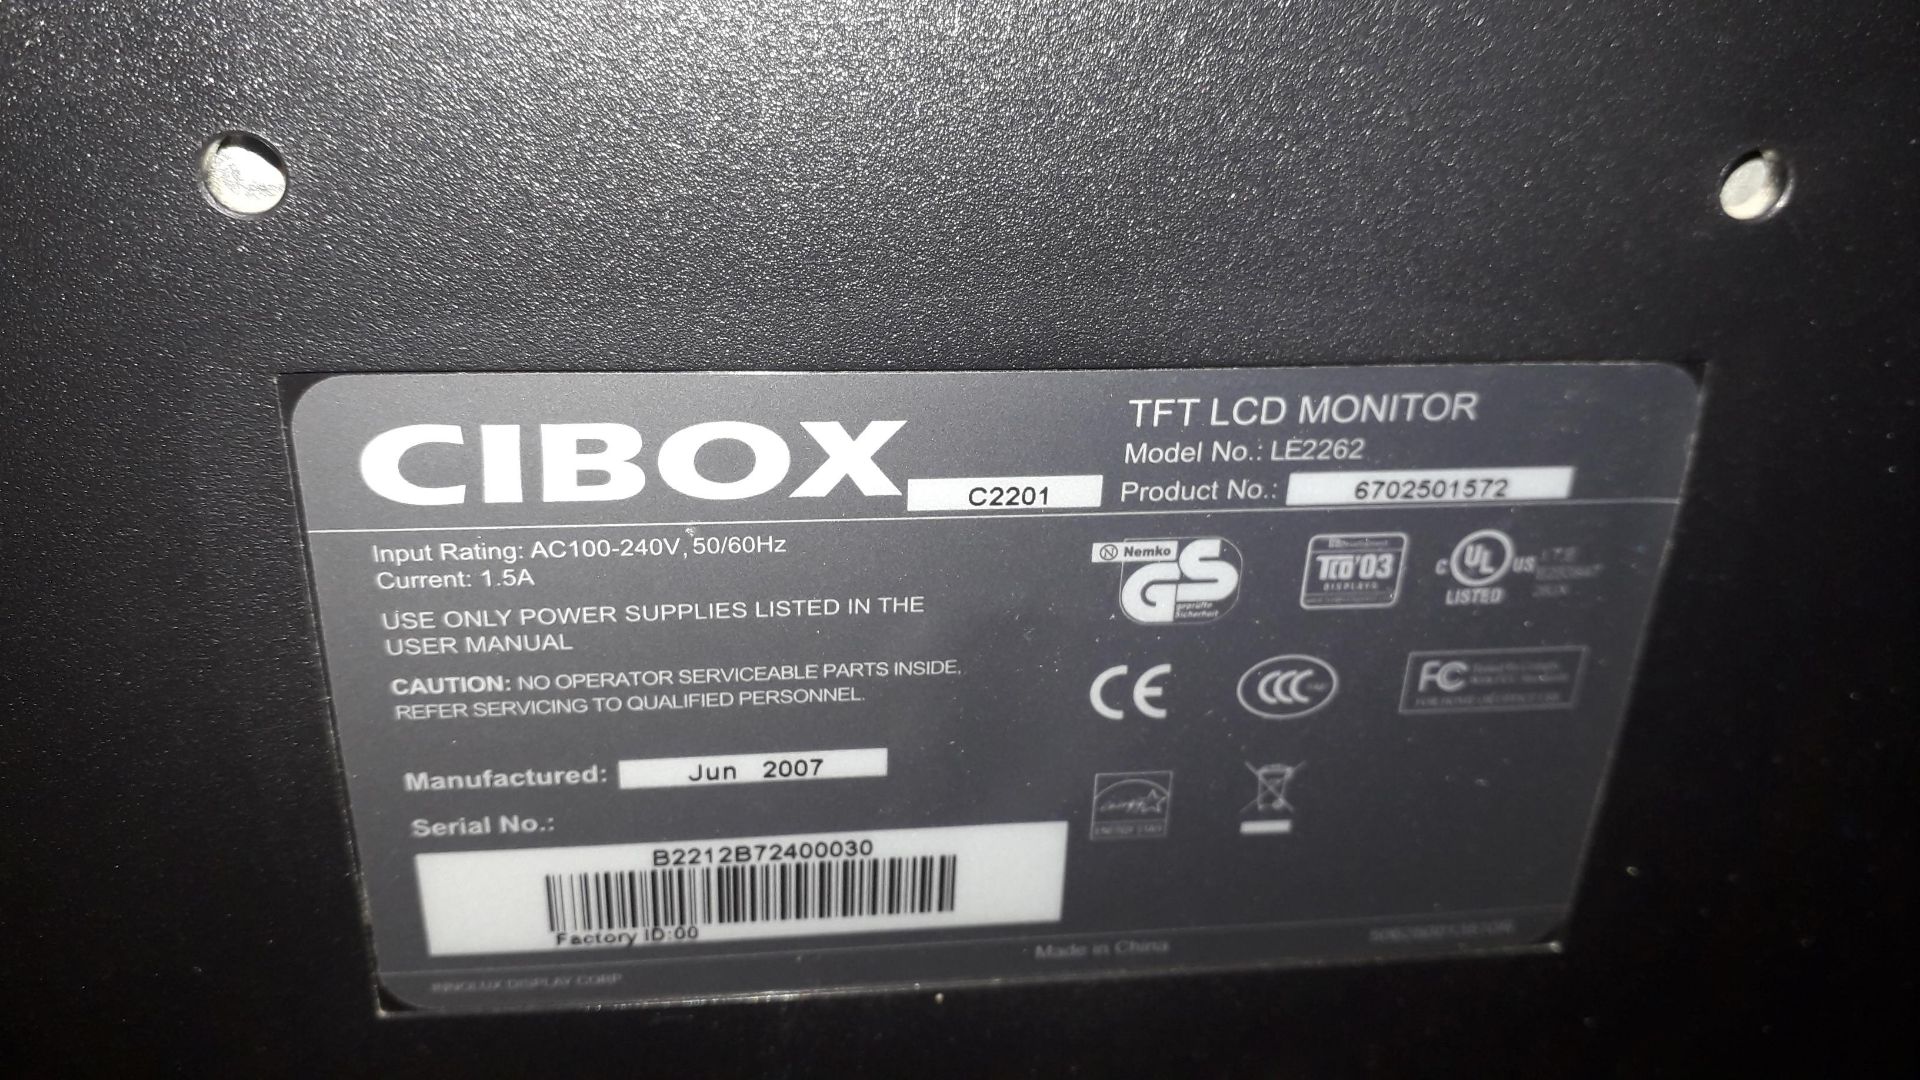 CIBOX LE2262 22" LCD Monitors (2007) - Located on 1st Floor - Image 3 of 3